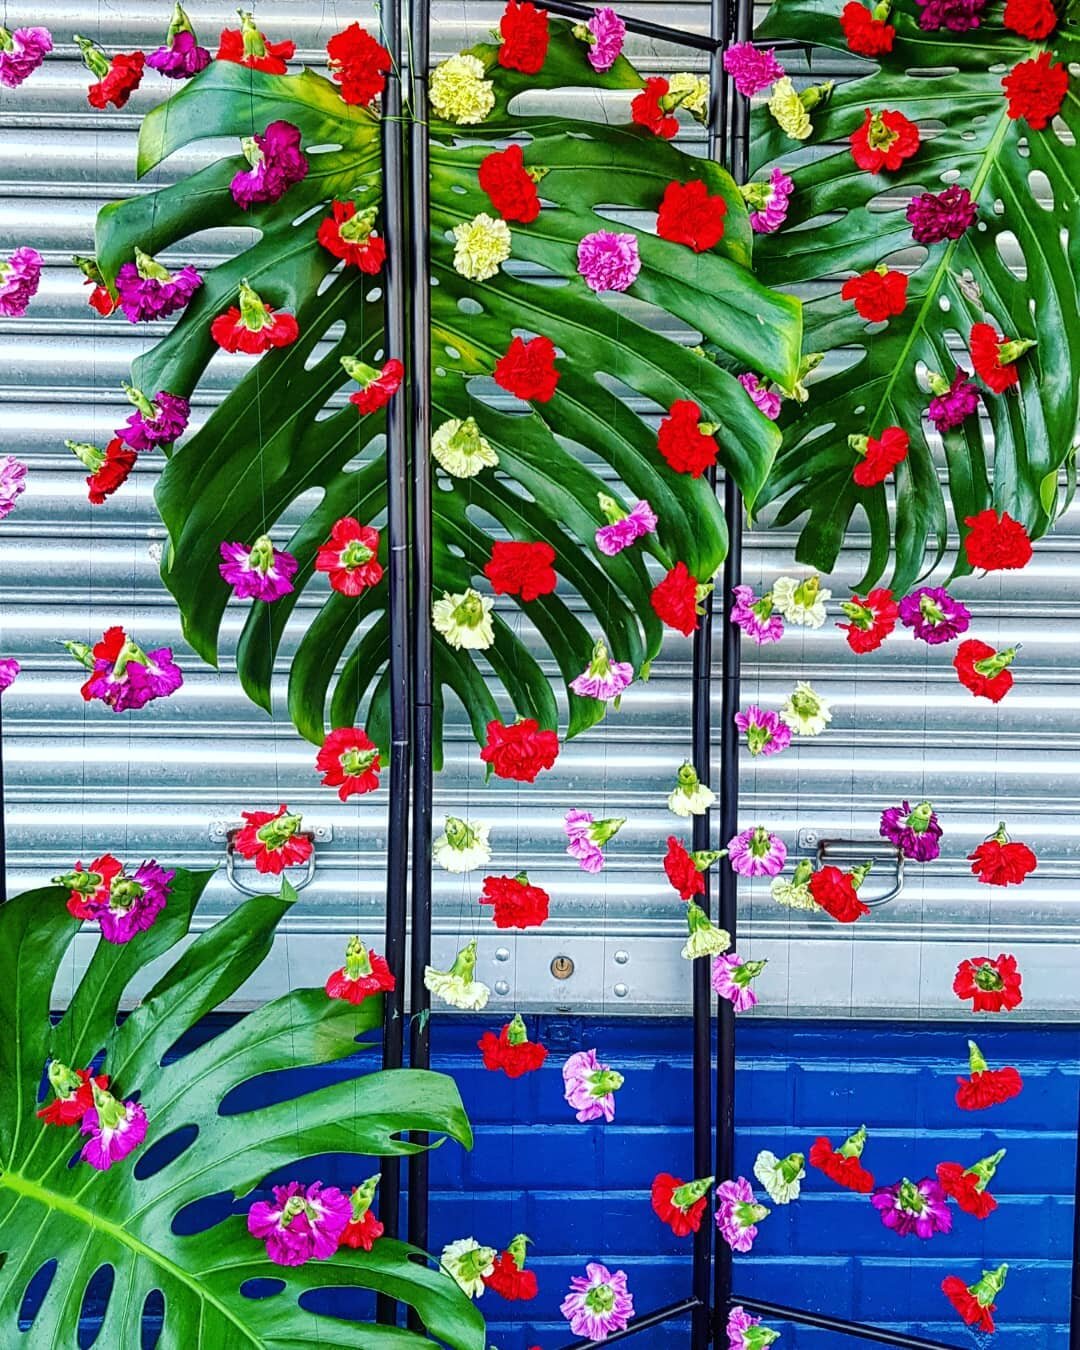 Window shopping 🌿🌷

A tropical storm in the window tomorrow!

Pop past and check out our new display. 

We create these flower curtains for weddings and events 🍃

With Love, LB x.

#windowdisplay #tropicalleaf #eventdecor #glasgowweddings #wedding